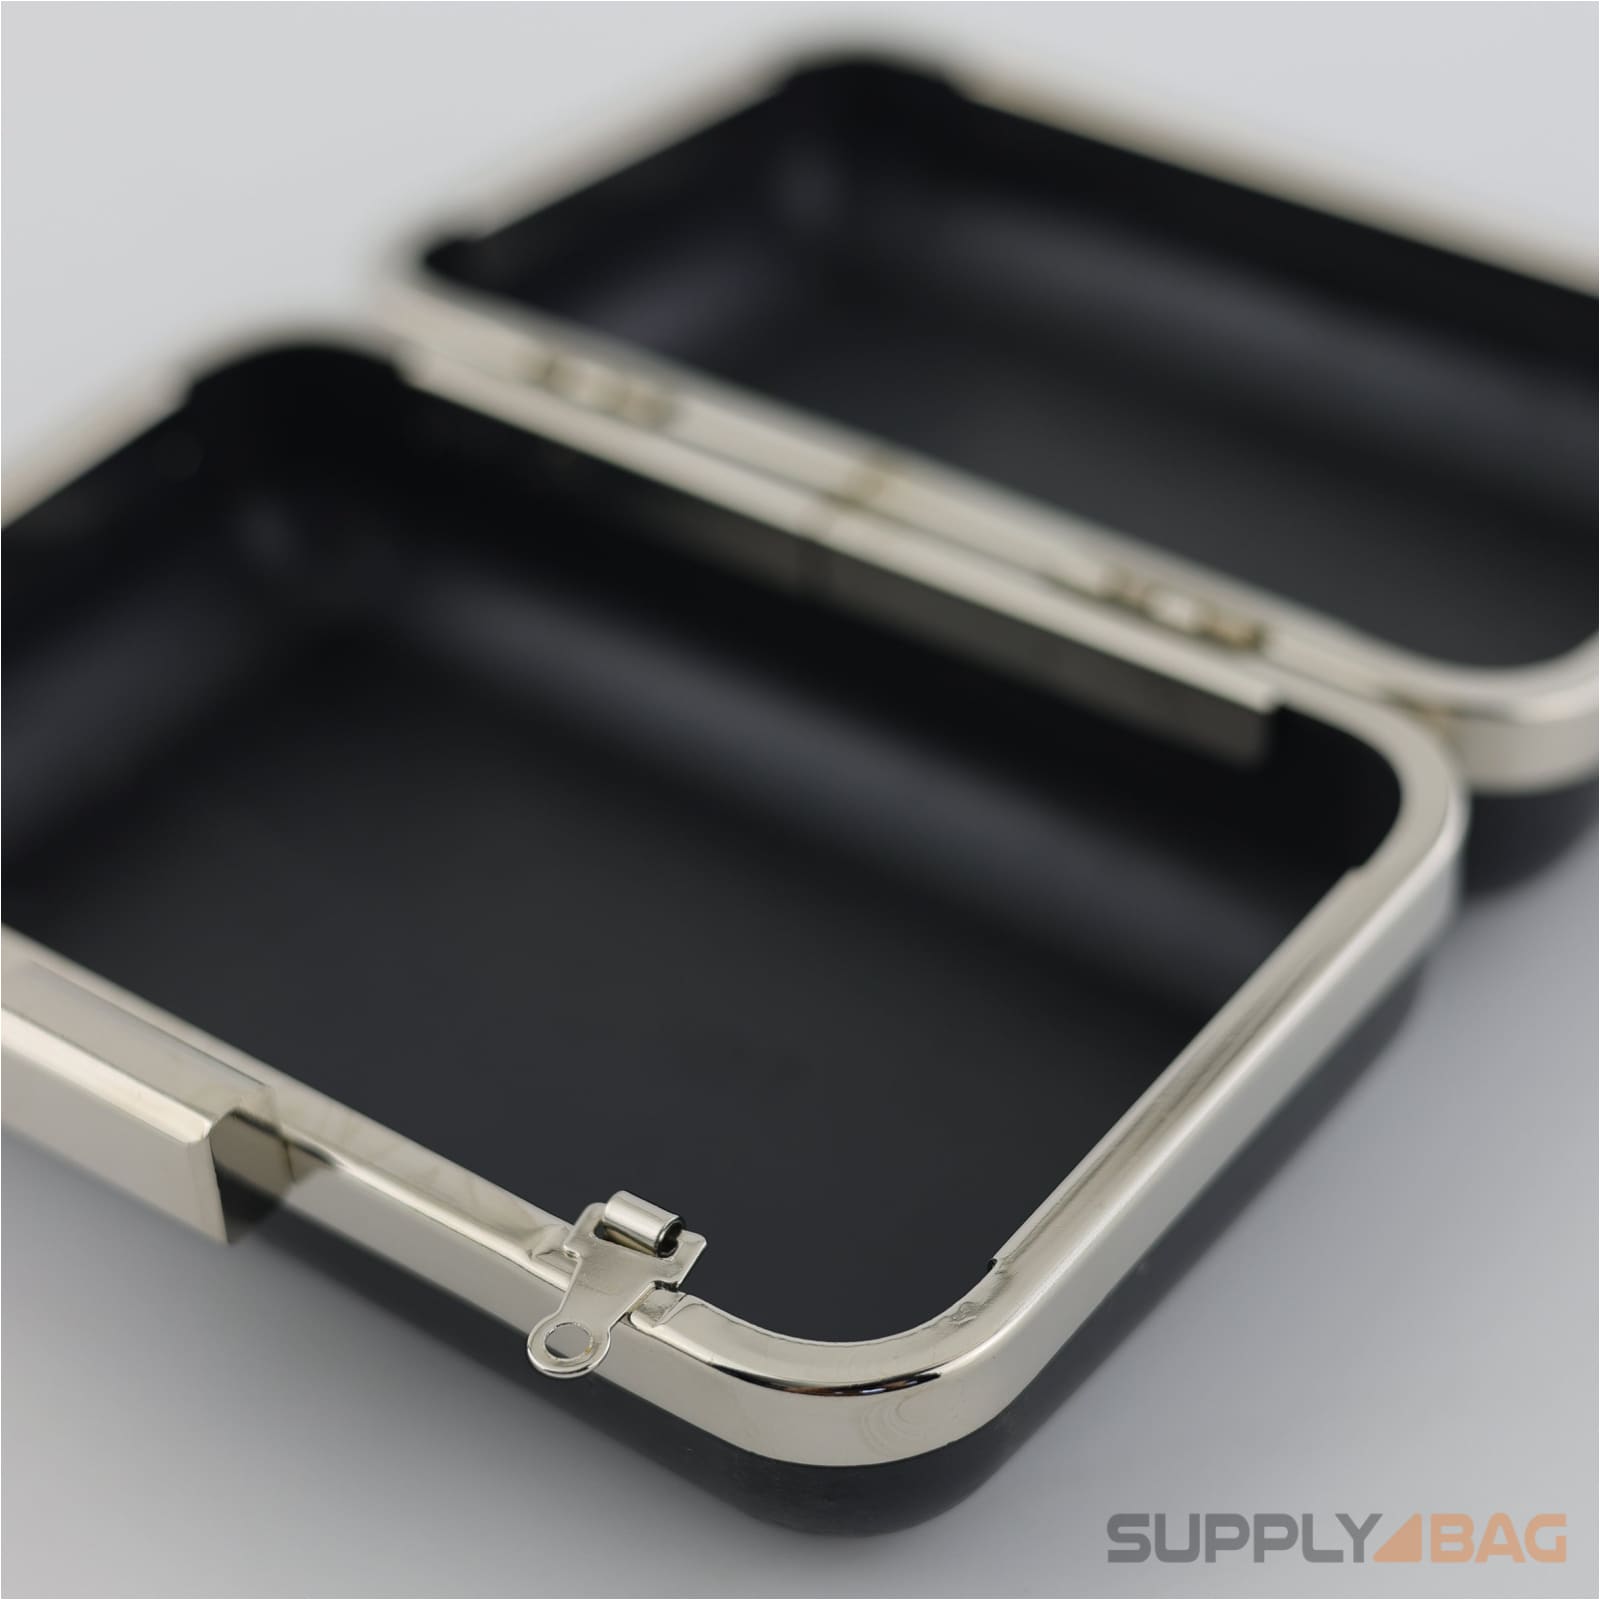 5 3/8 x 3 1/2 inch - silver clamshell clutch frame with covers